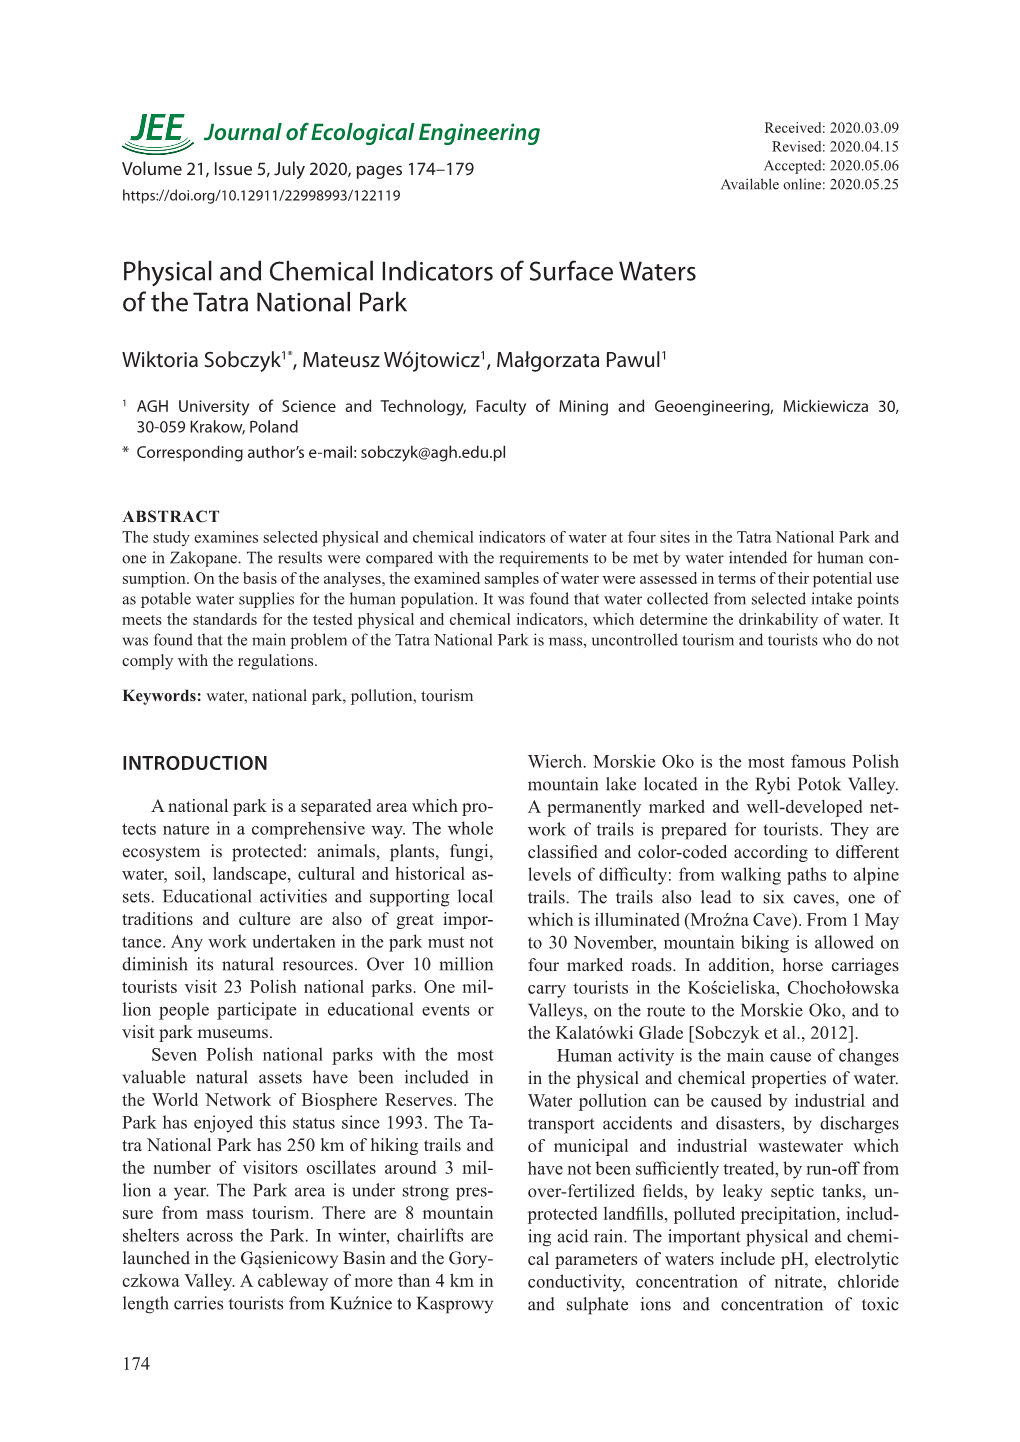 Physical and Chemical Indicators of Surface Waters of the Tatra National Park